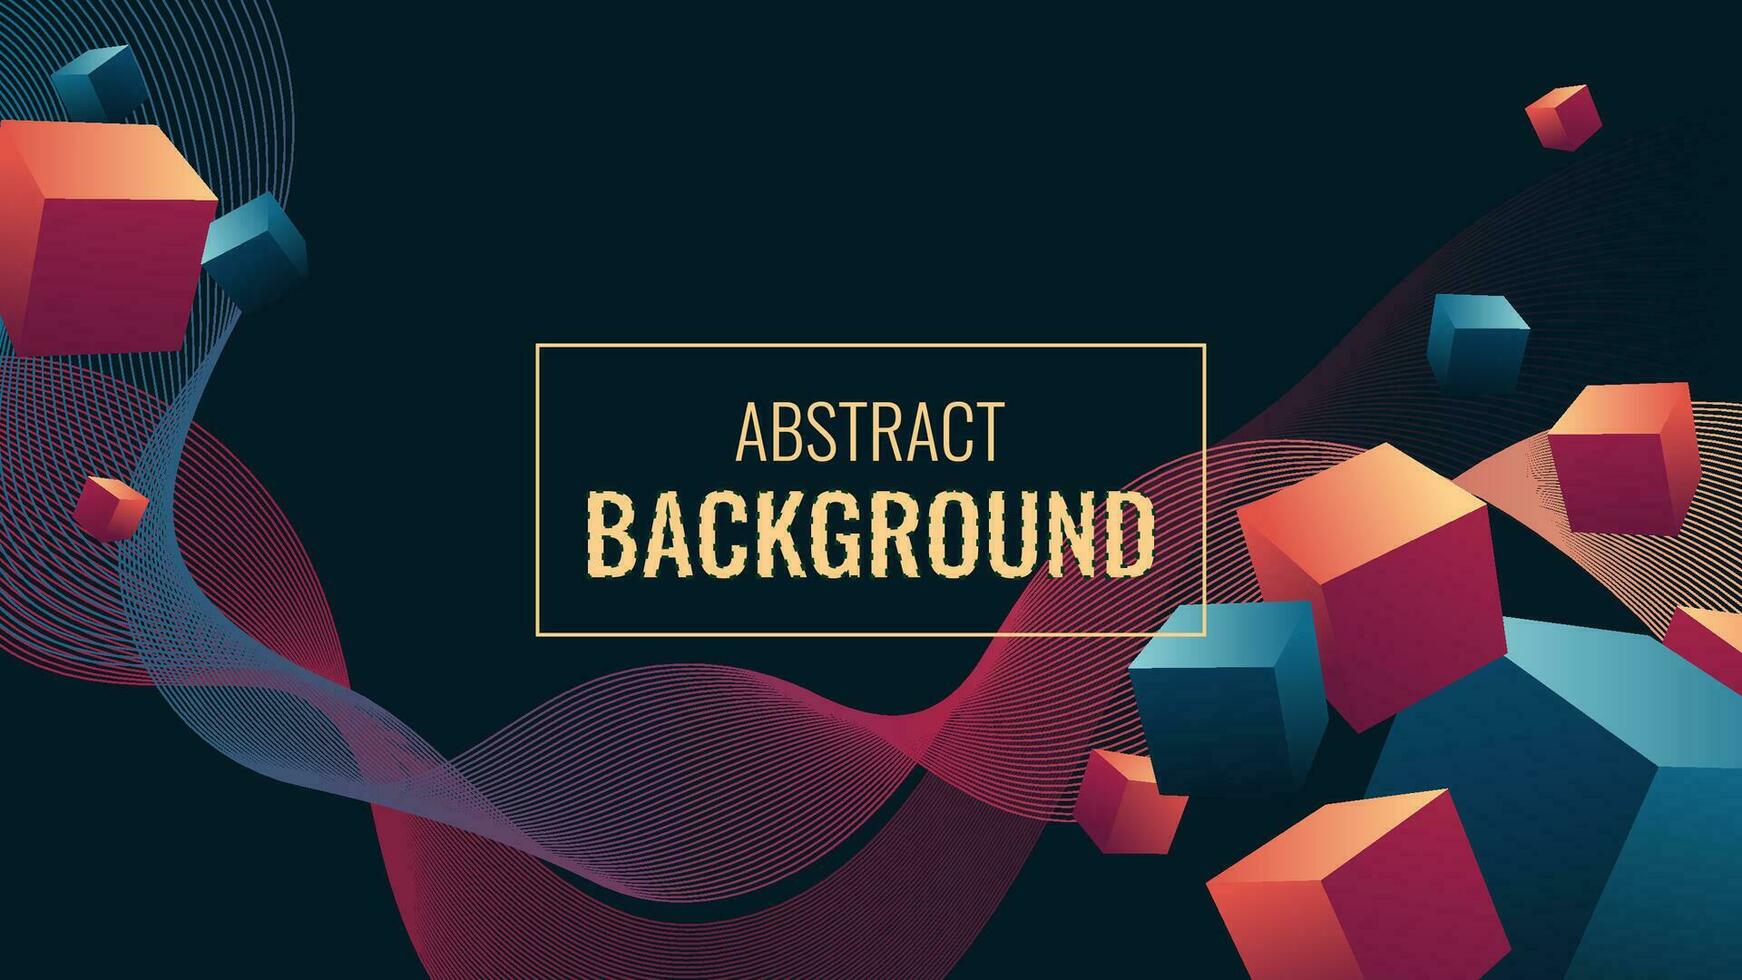 Abstract geometric background with 3d box style and wavy curve lines. Elegant abstract background vector